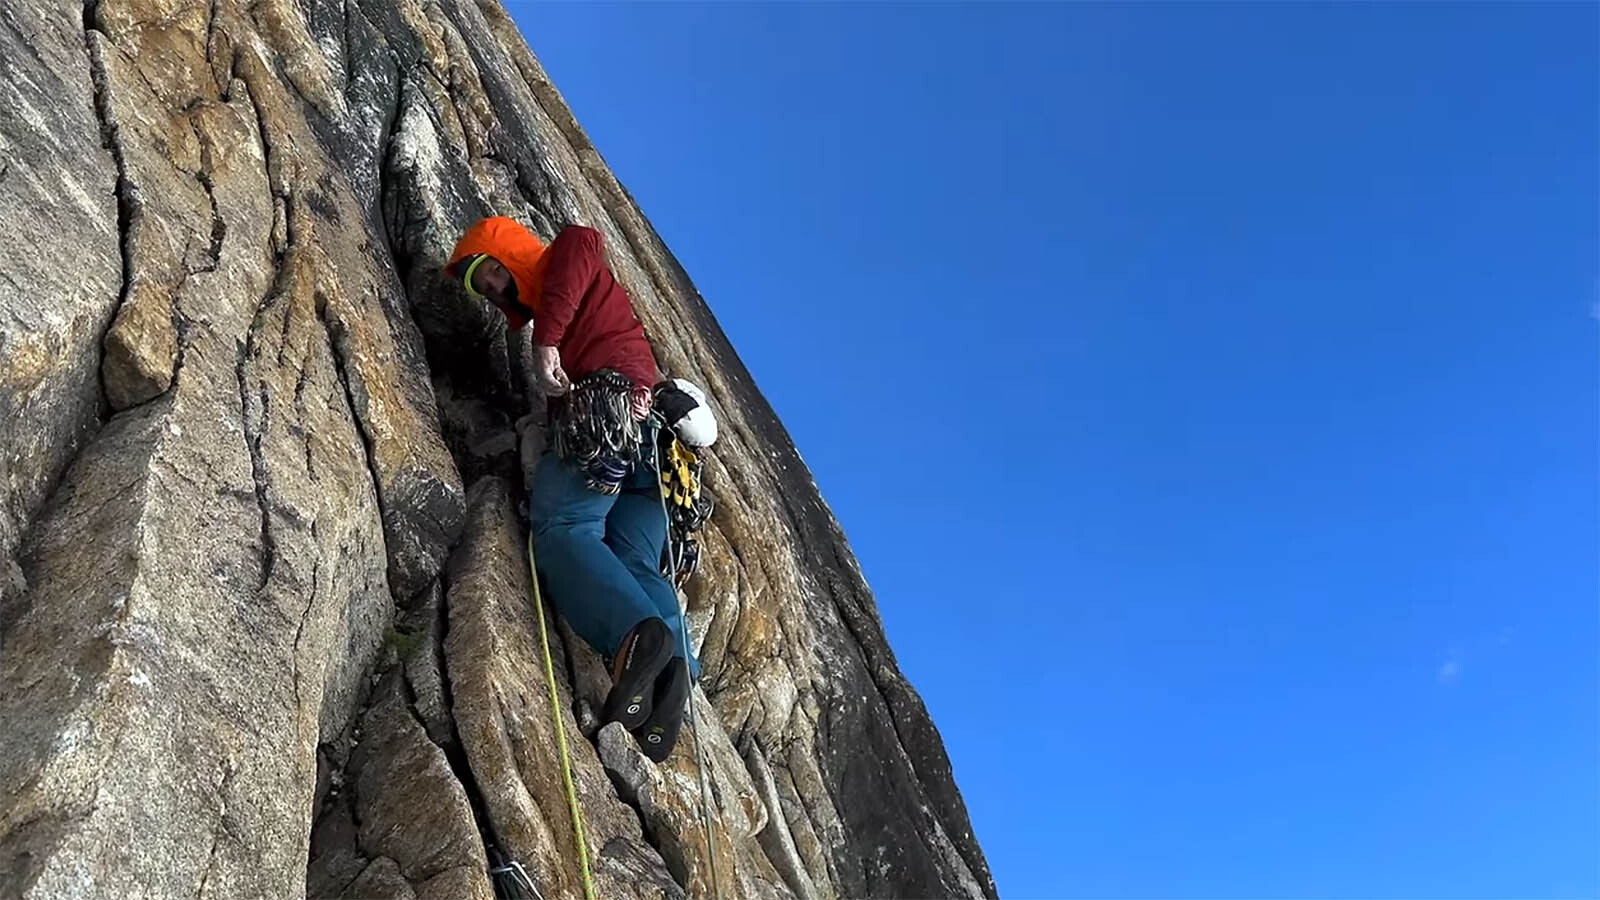 Jesse Huey navigates a sheer rock wall during a July 2023 ascent up the Cowboy Direct route of Trango Towers.